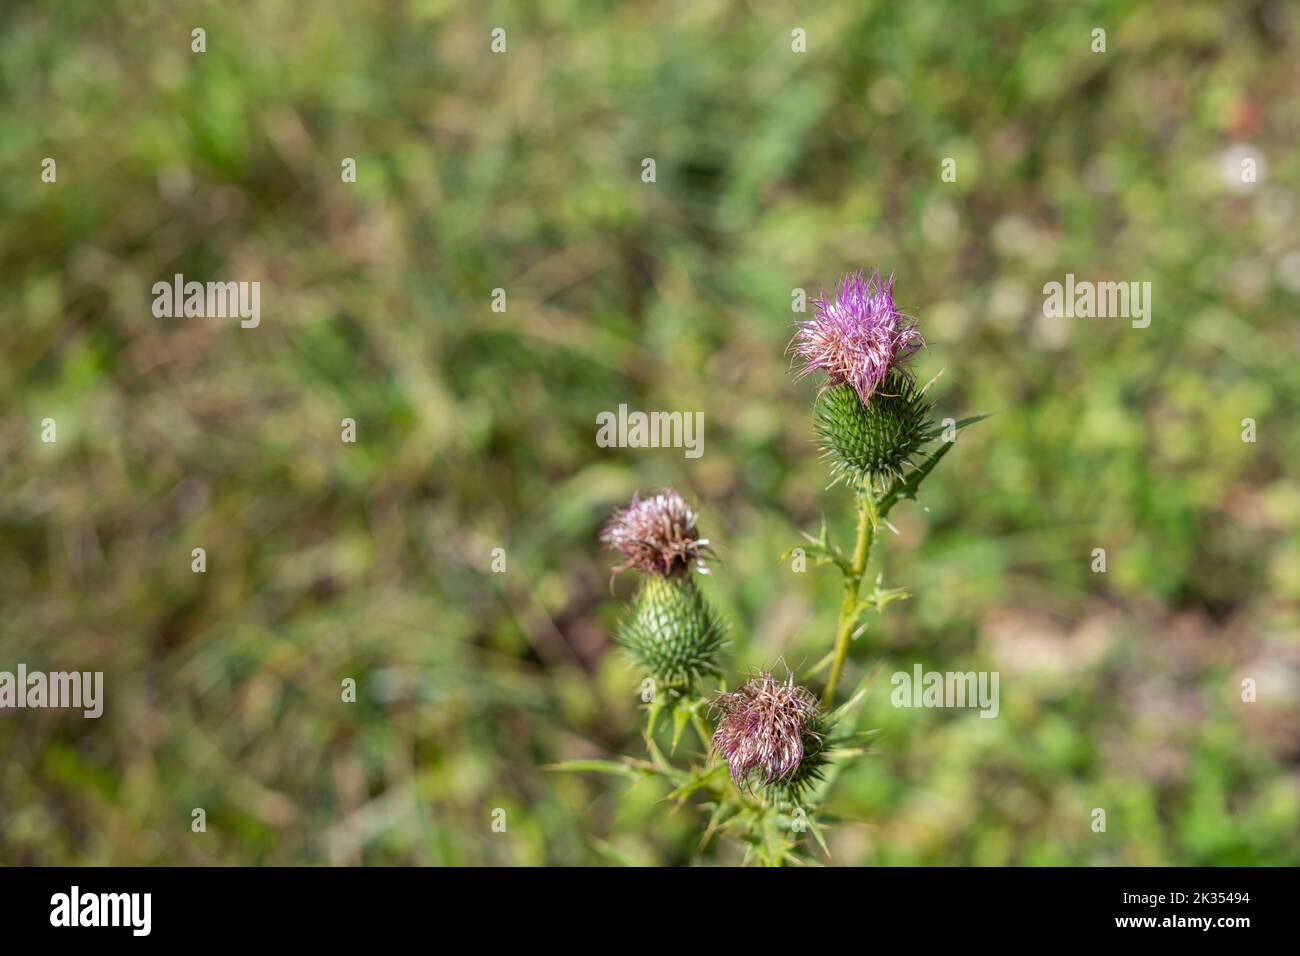 Dry and fresh flower of burdock plant with blurred background Stock Photo